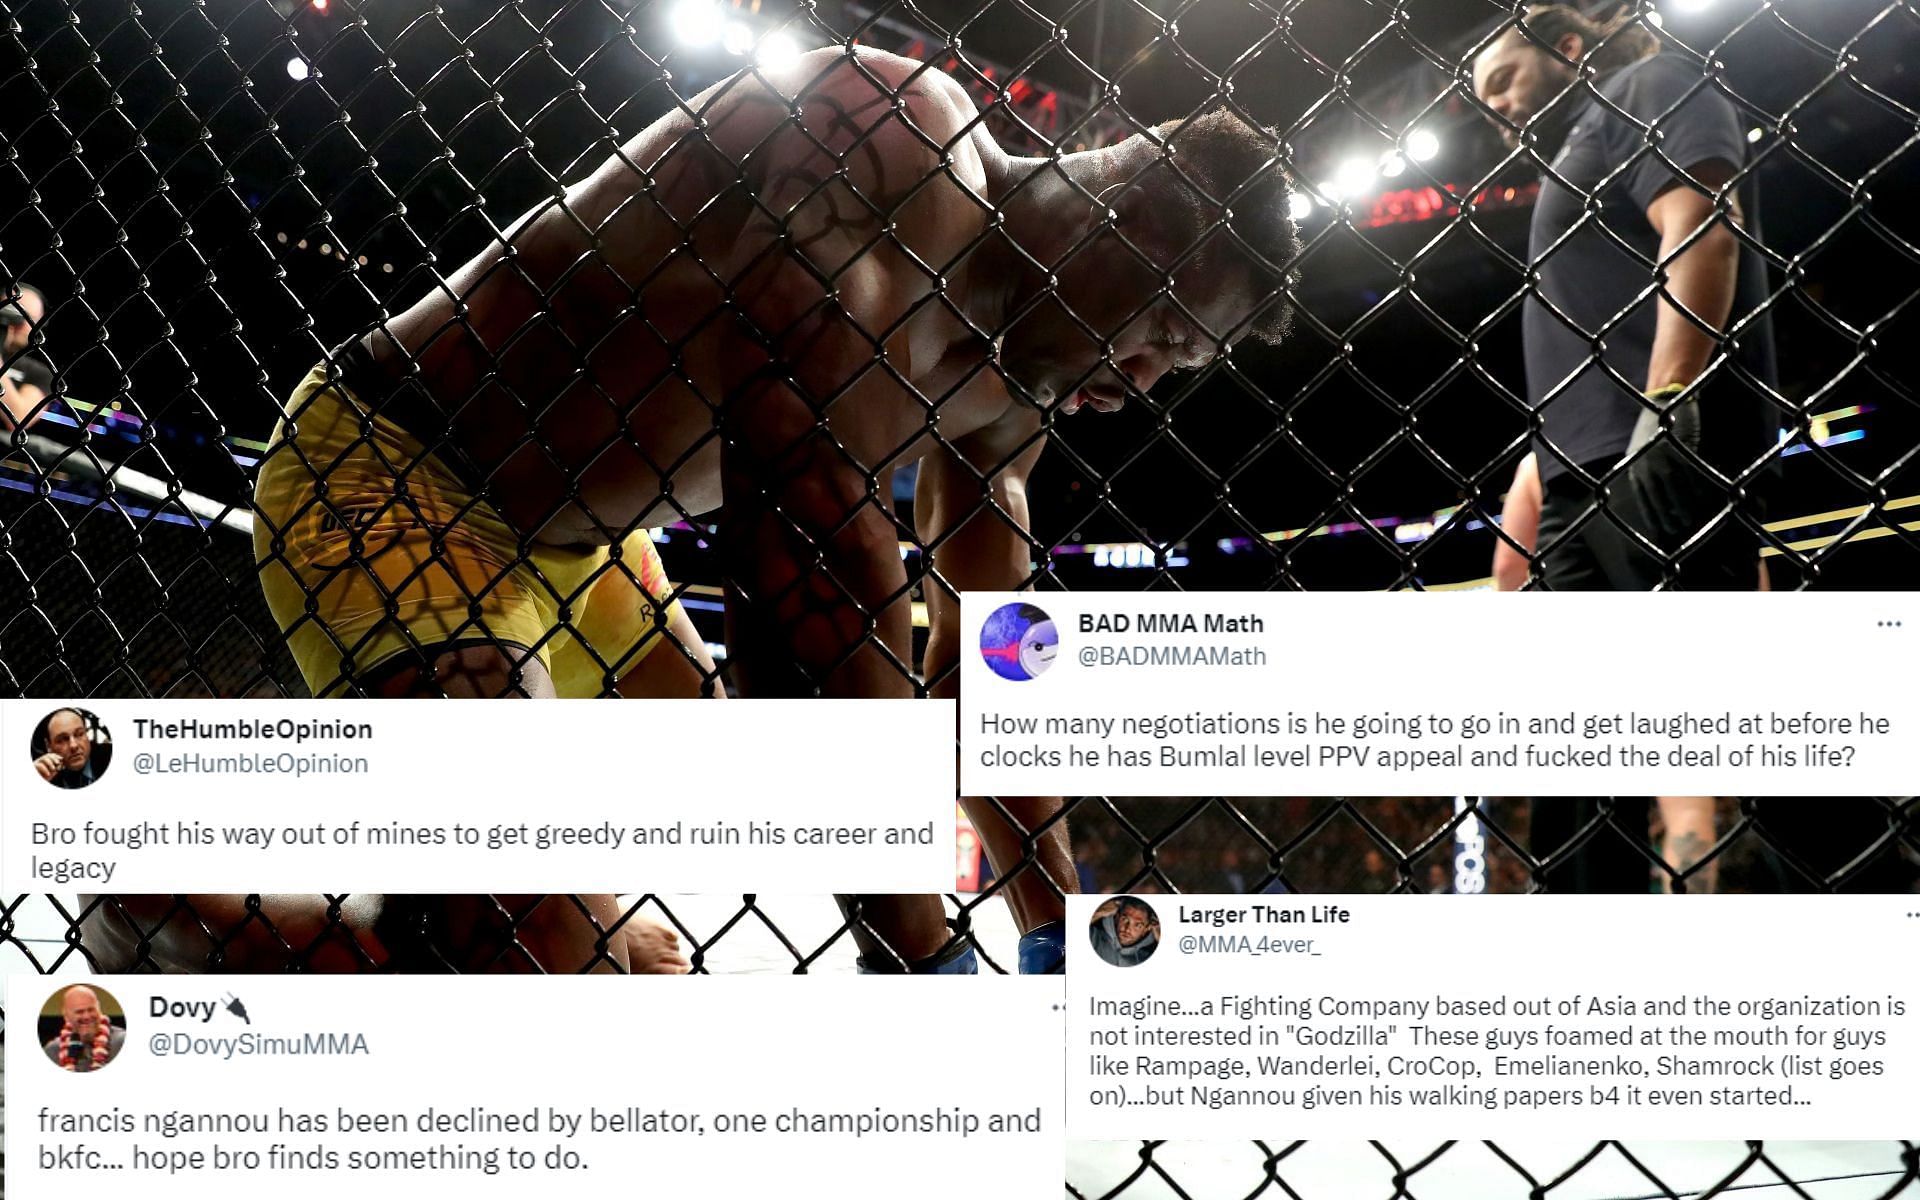 Fans criticize Francis Ngannou after failed negotiations with ONE FC [Image credits: @BADMMAMath, @LeHumbleOpinion, @DovySimuMMA and MMA_4ever_ on Twitter]